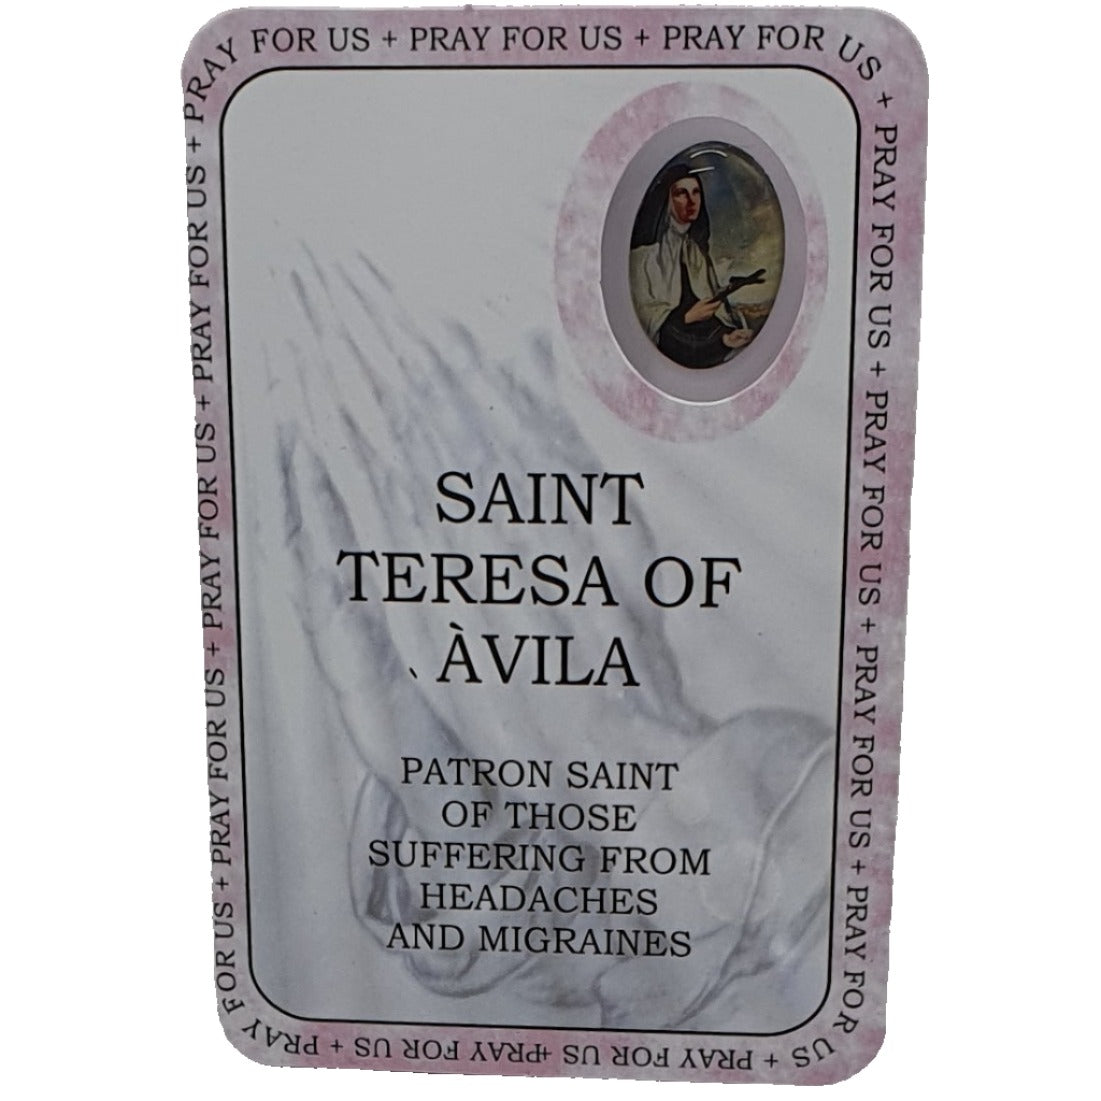 St Teresa of Avila Prayer Card - Patron Saint of those suffering from Headaches and Migraines